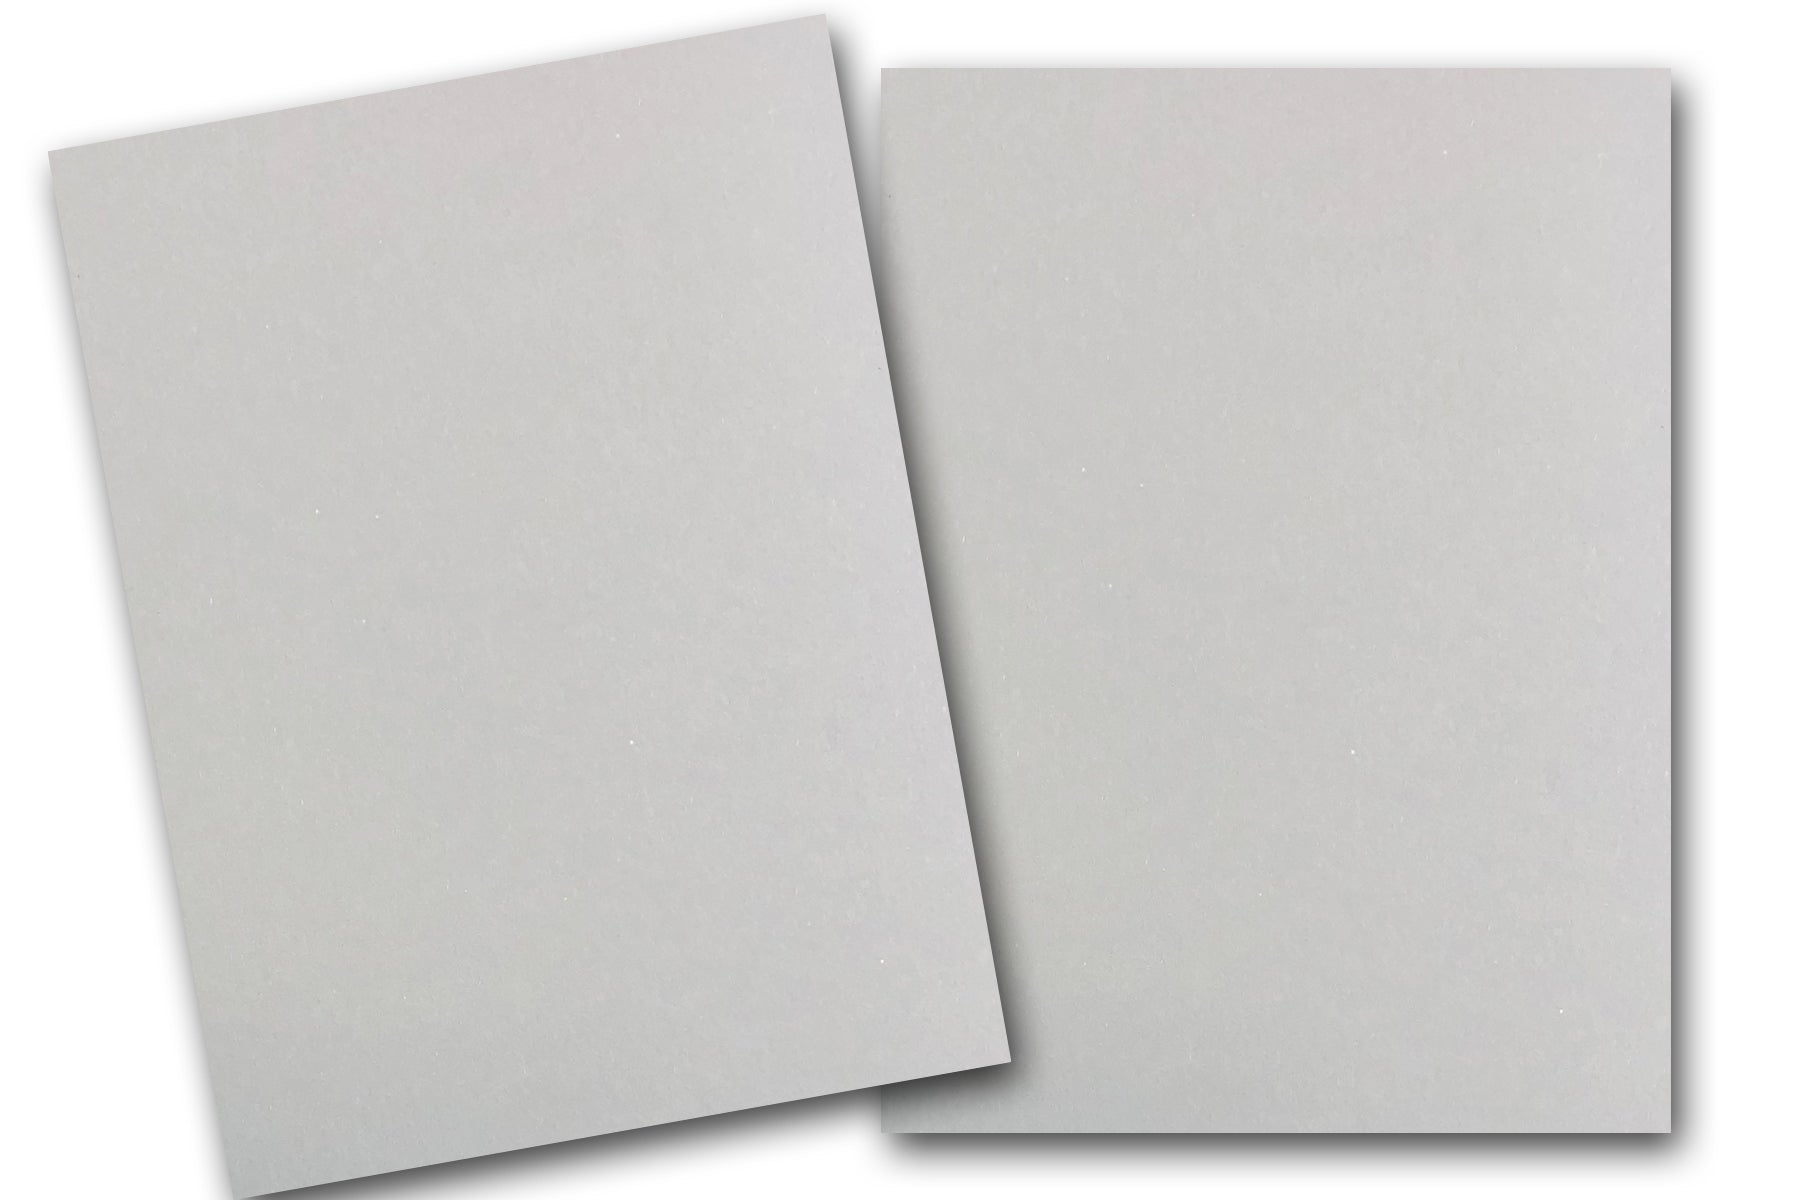  Springhill 8.5” x 11” Gray Colored Cardstock Paper